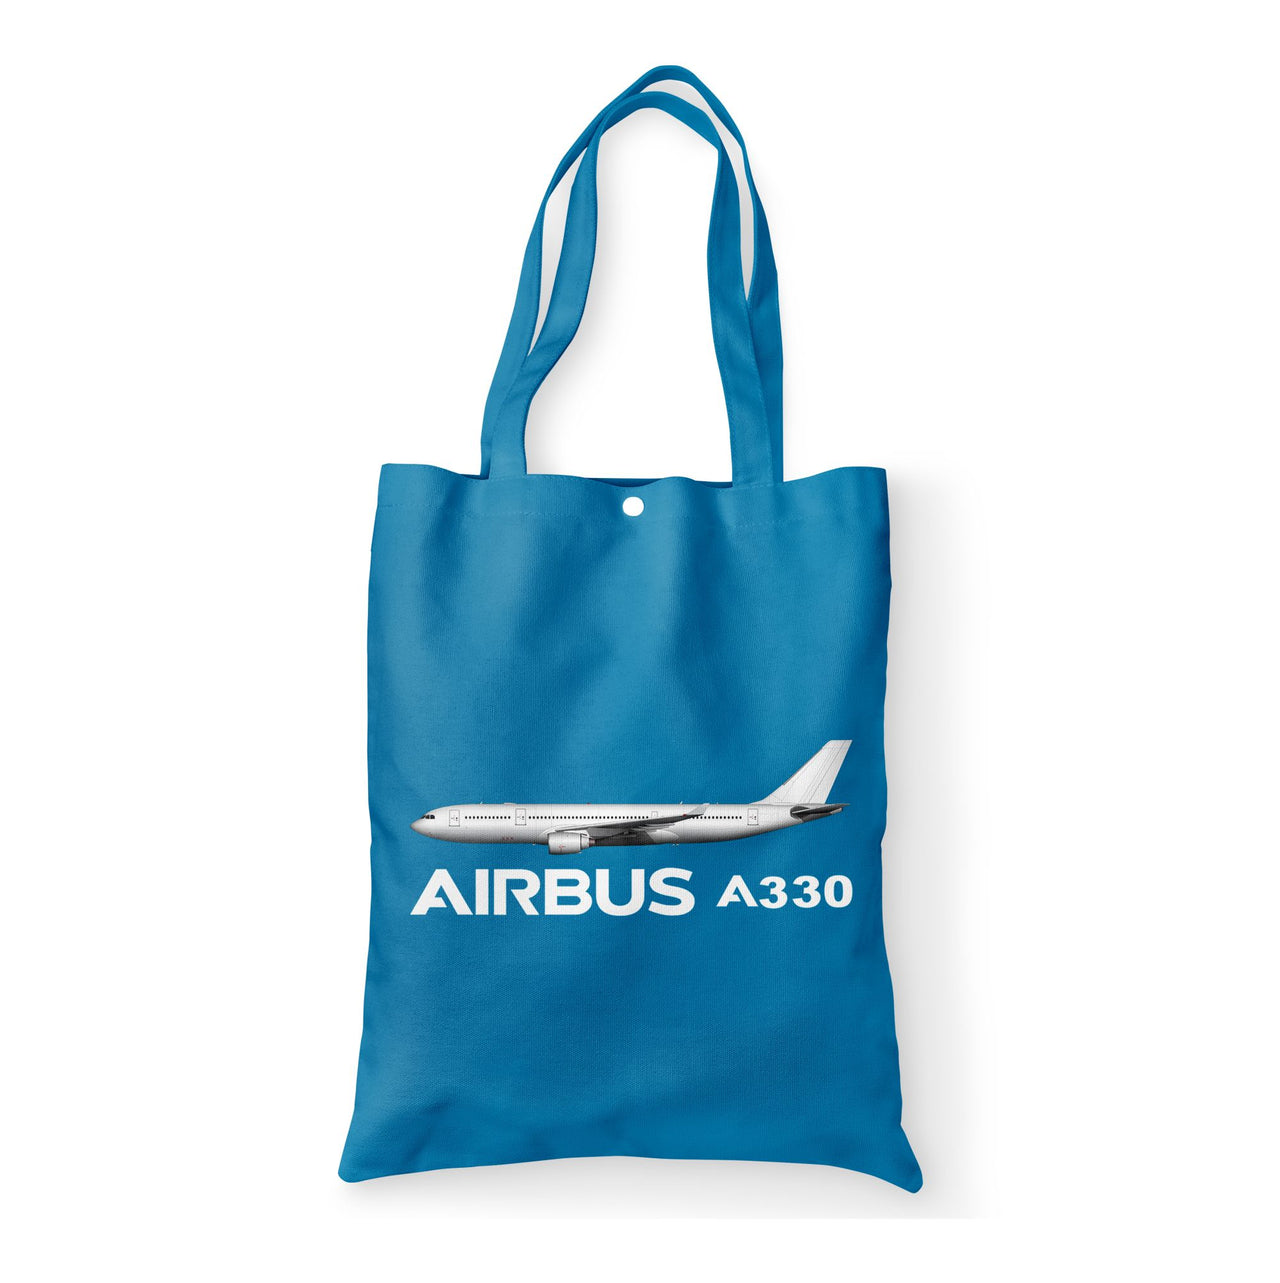 The Airbus A330 Designed Tote Bags